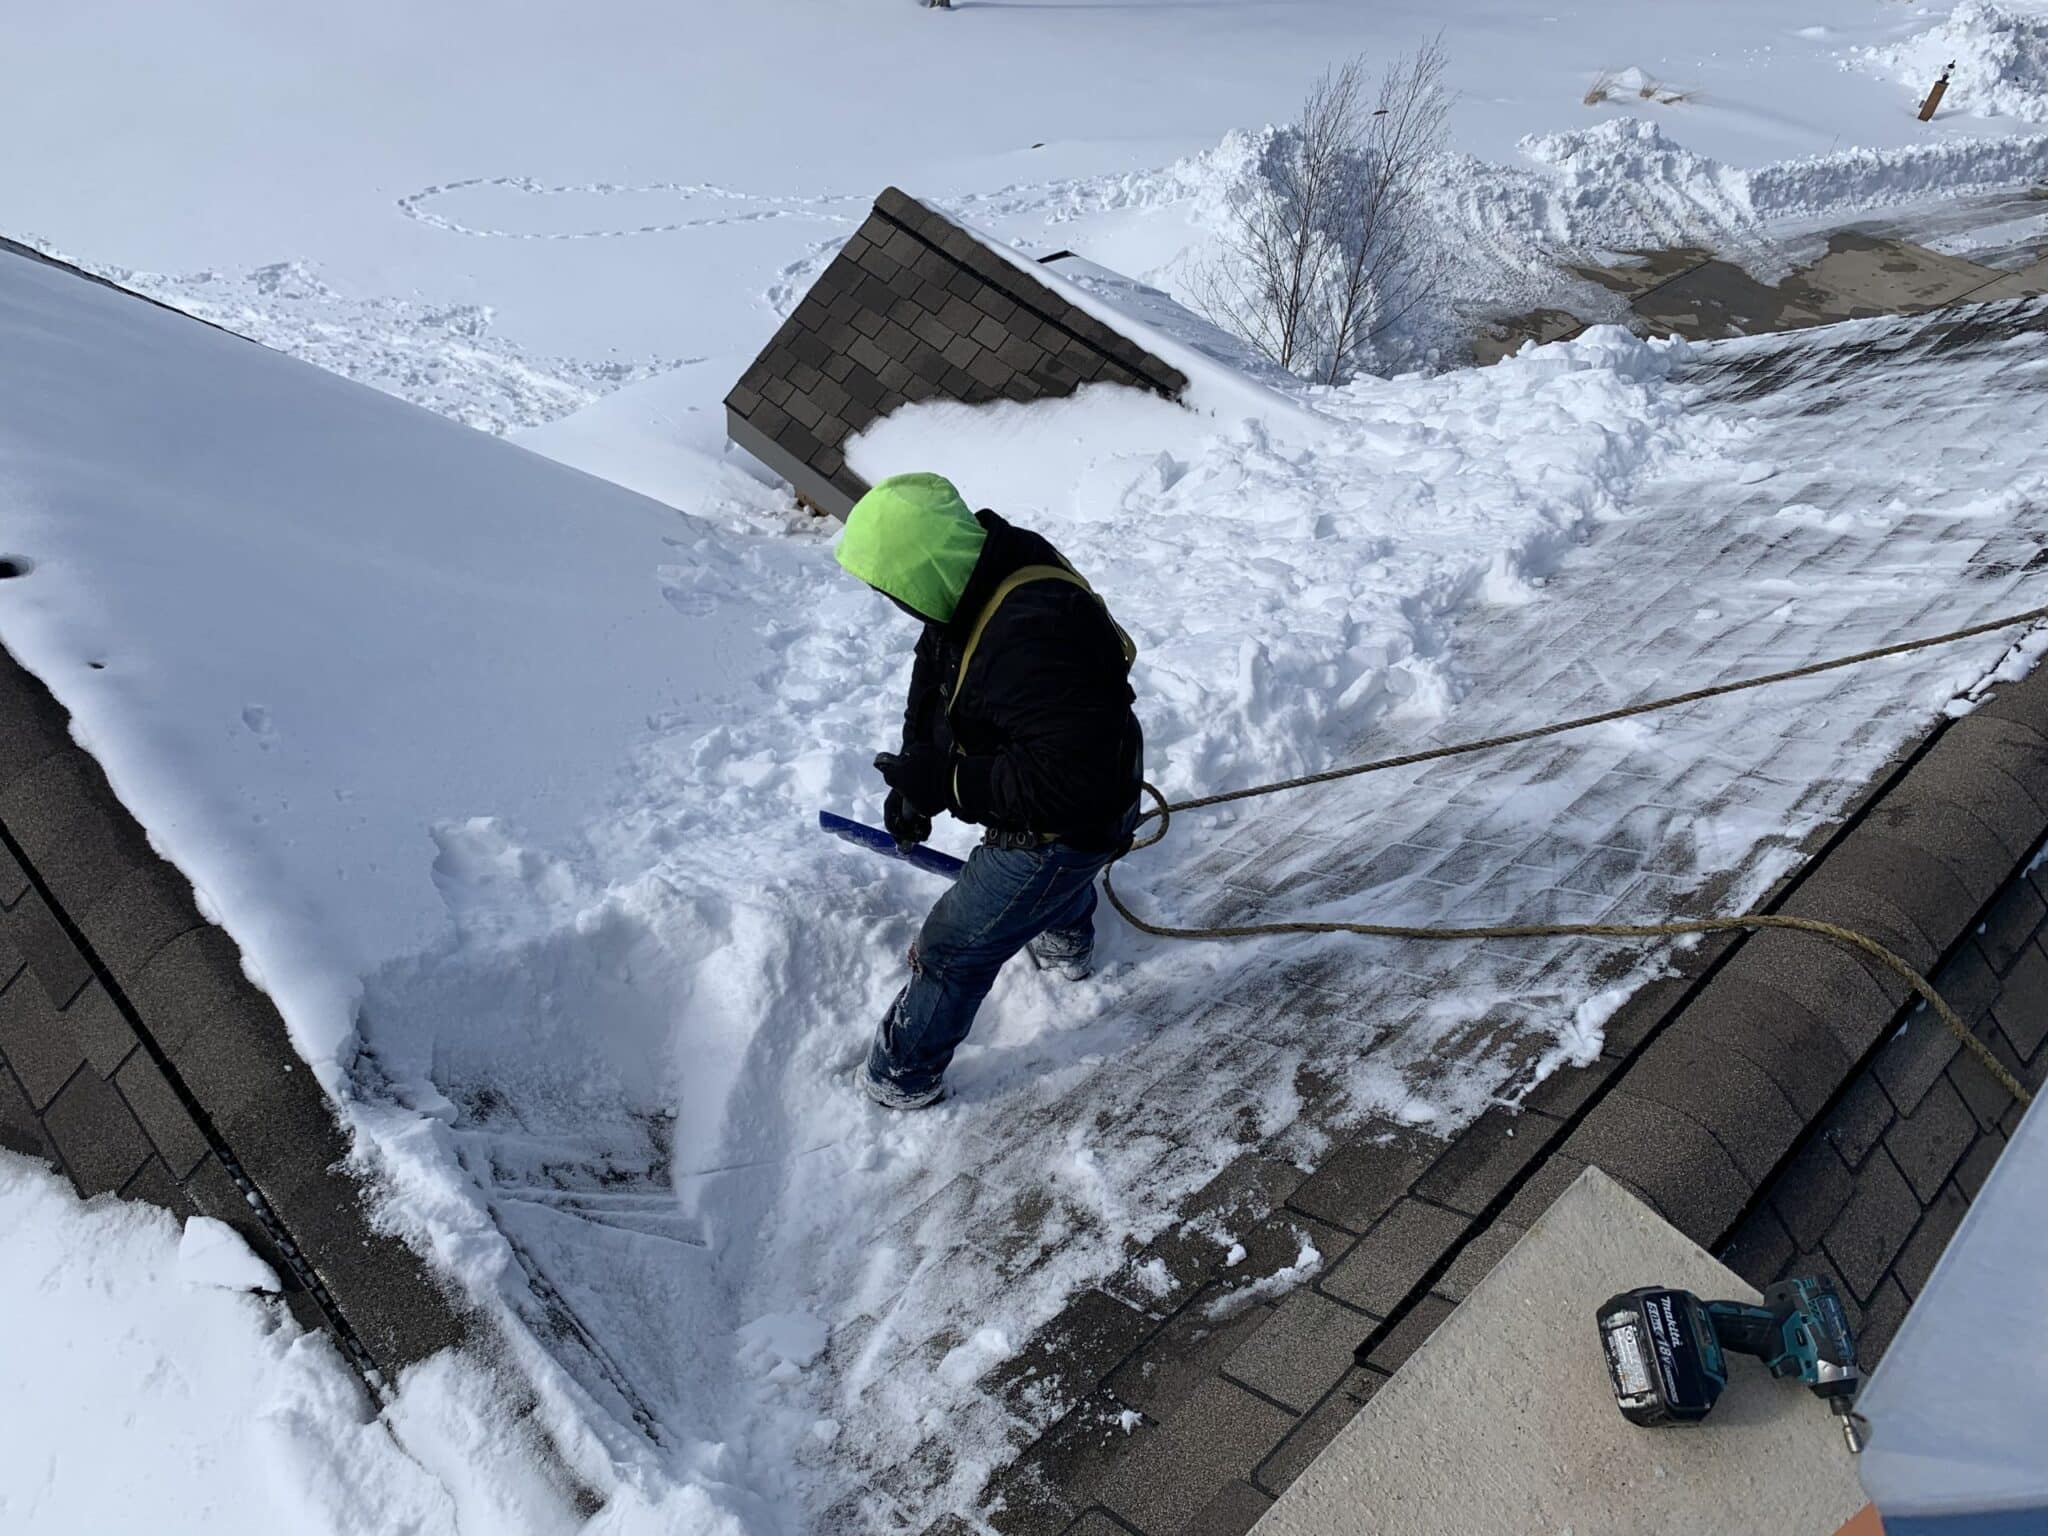 Worker almost finished shoveling snow from roof